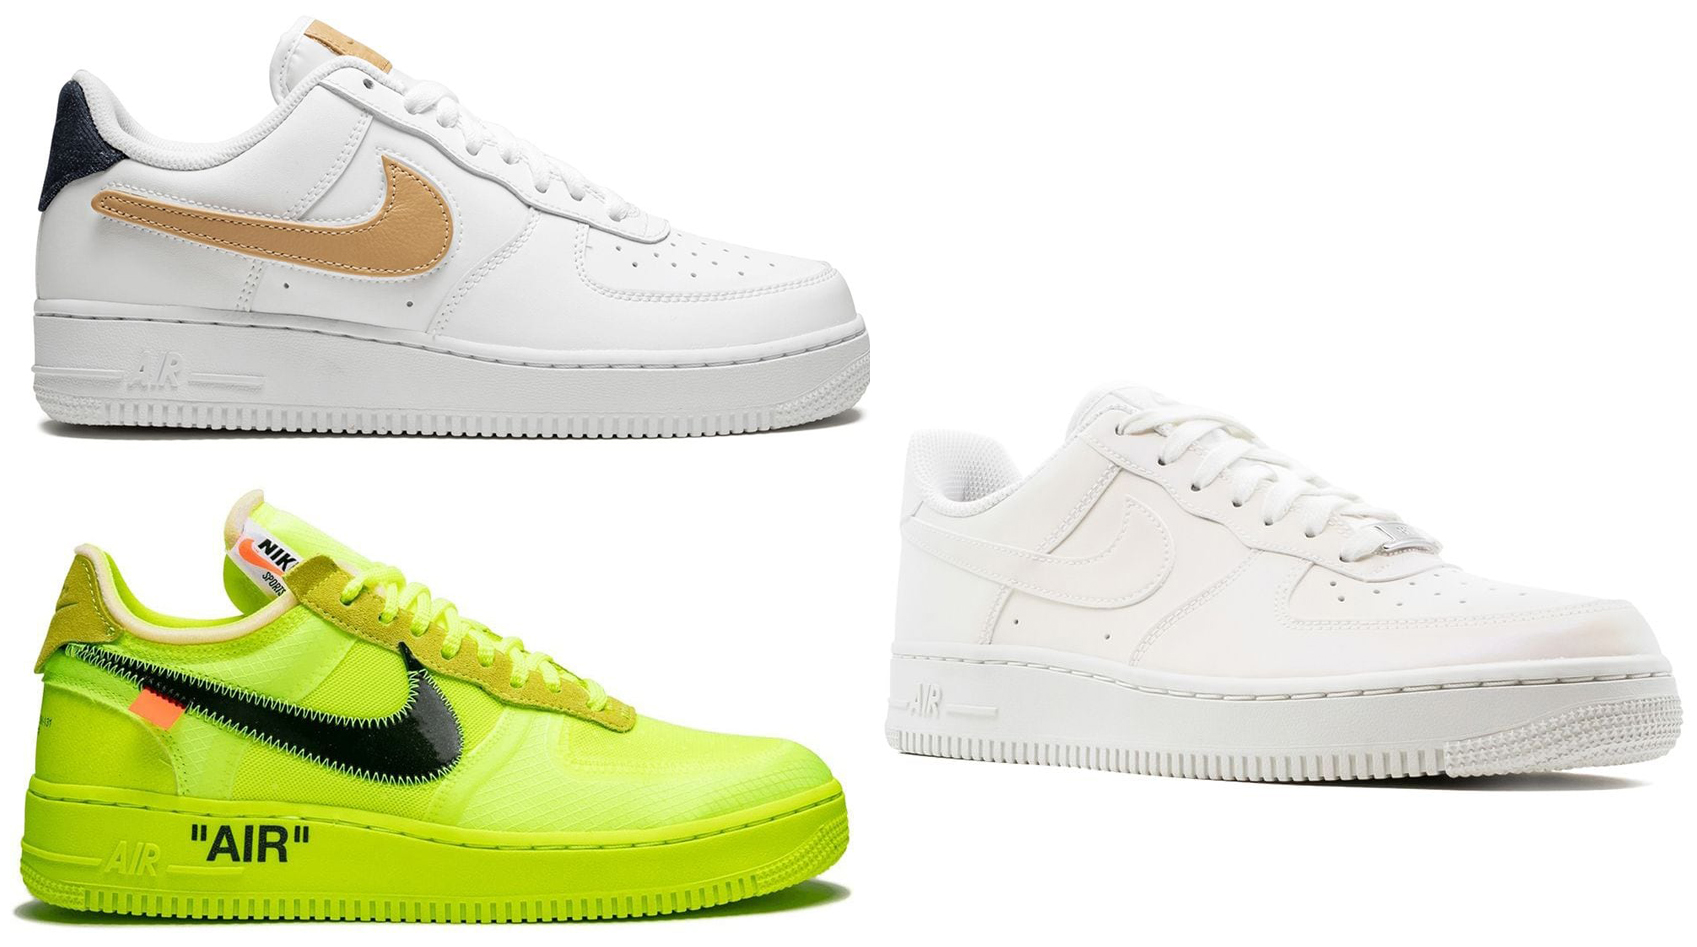 The Nike Air Force 1 offers unisex colorways that look great on any gender